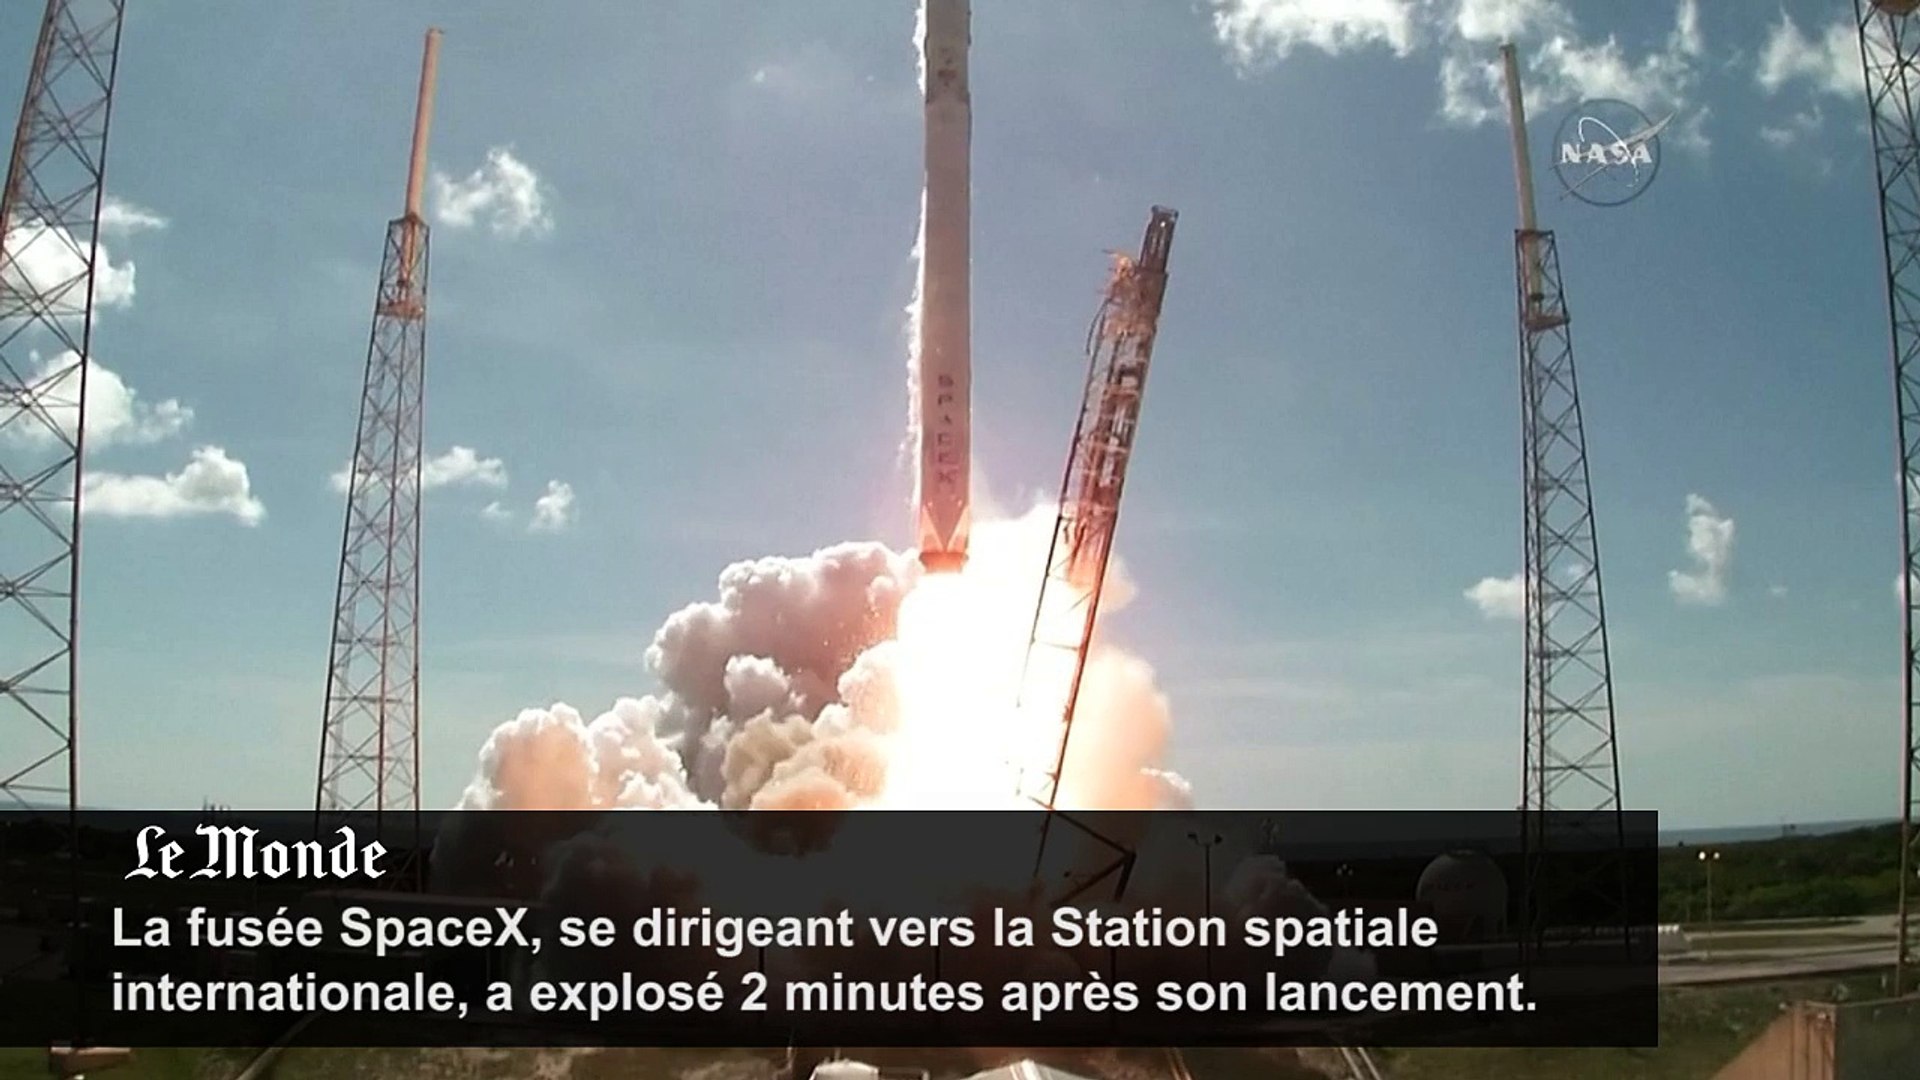 SpaceX Success Raises Expectations for Its Next Flight Model